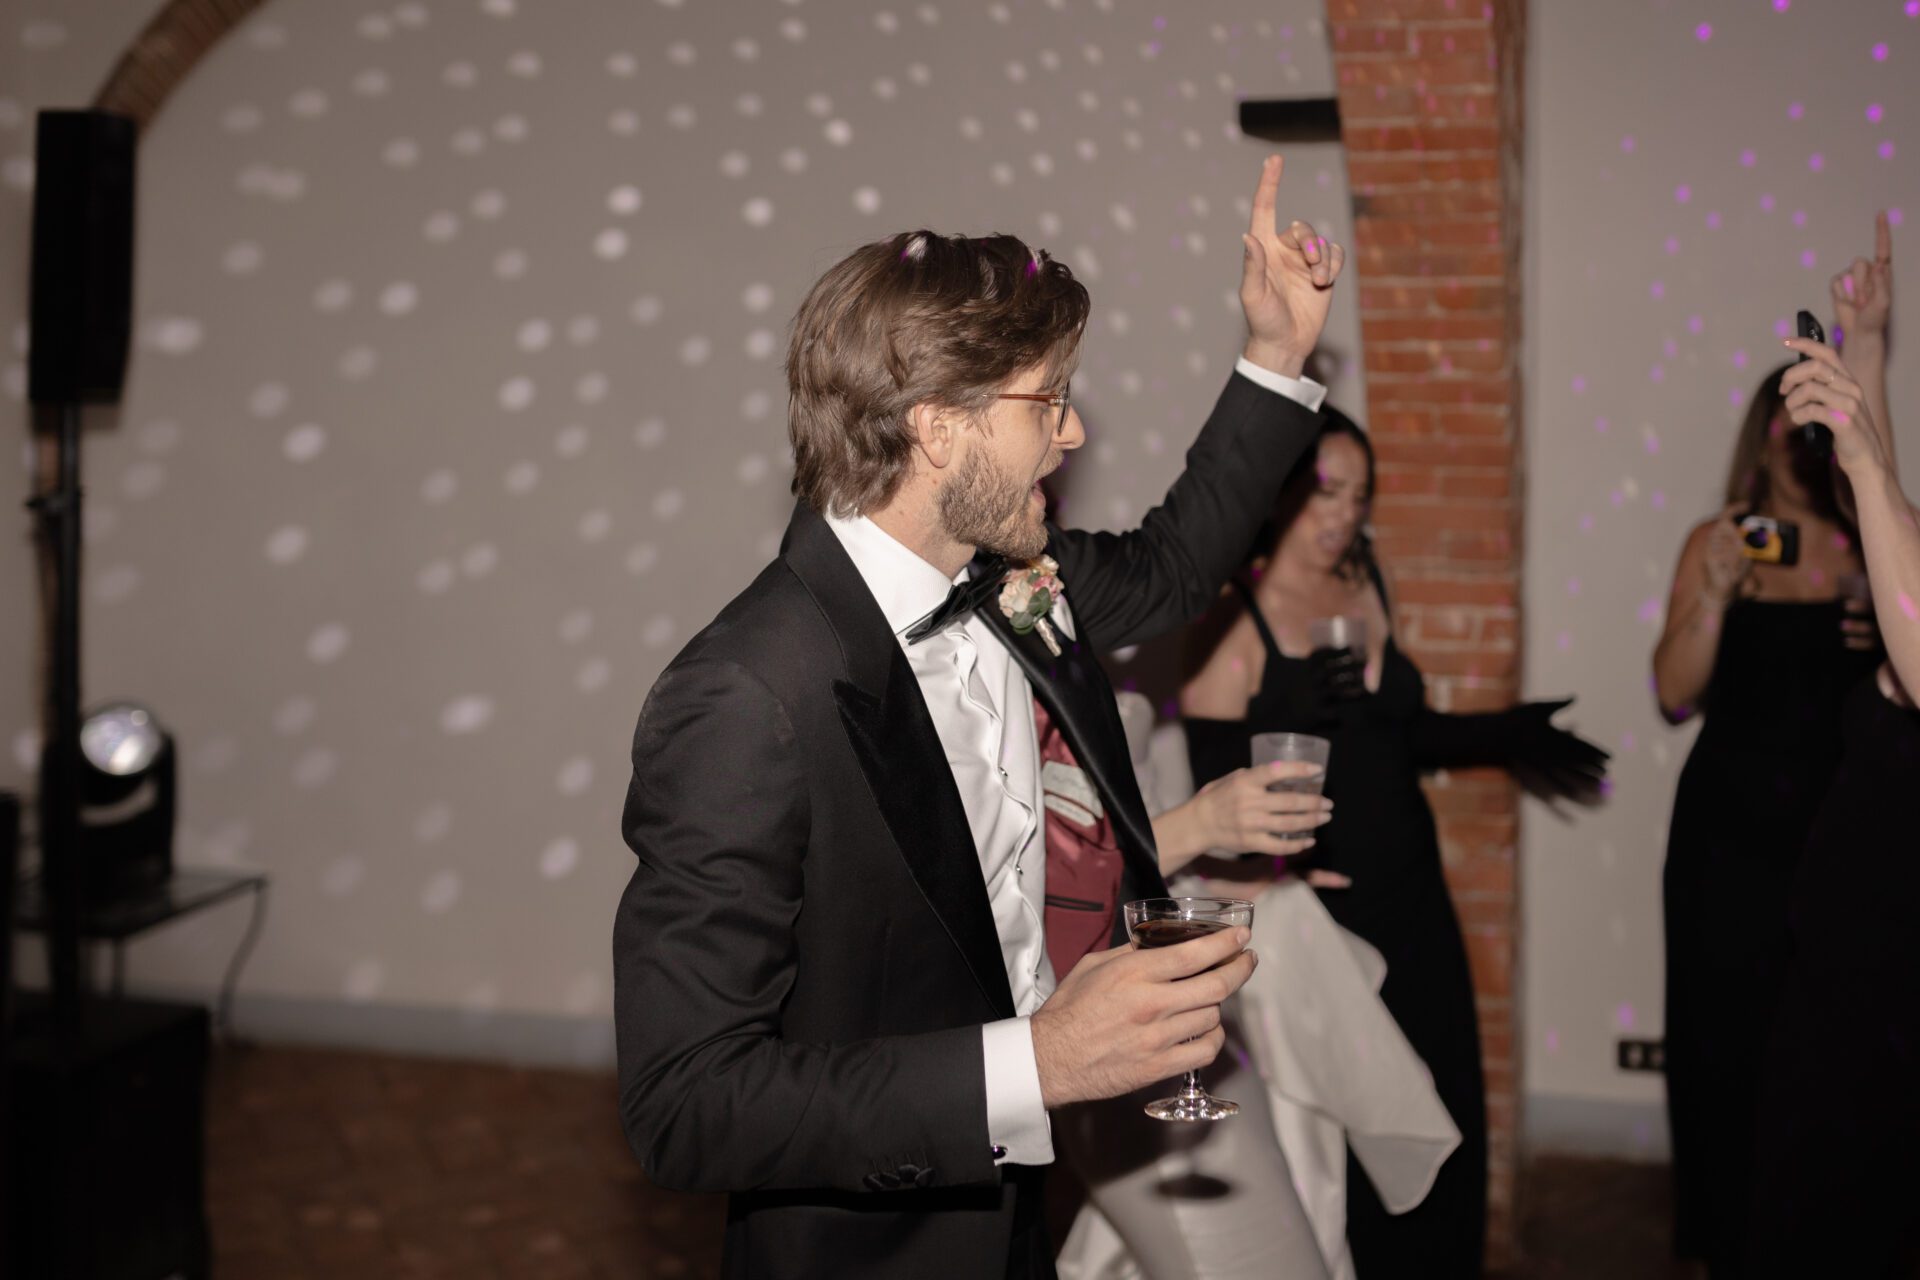 The groom enjoys the afterparty at his luxury Italian wedding